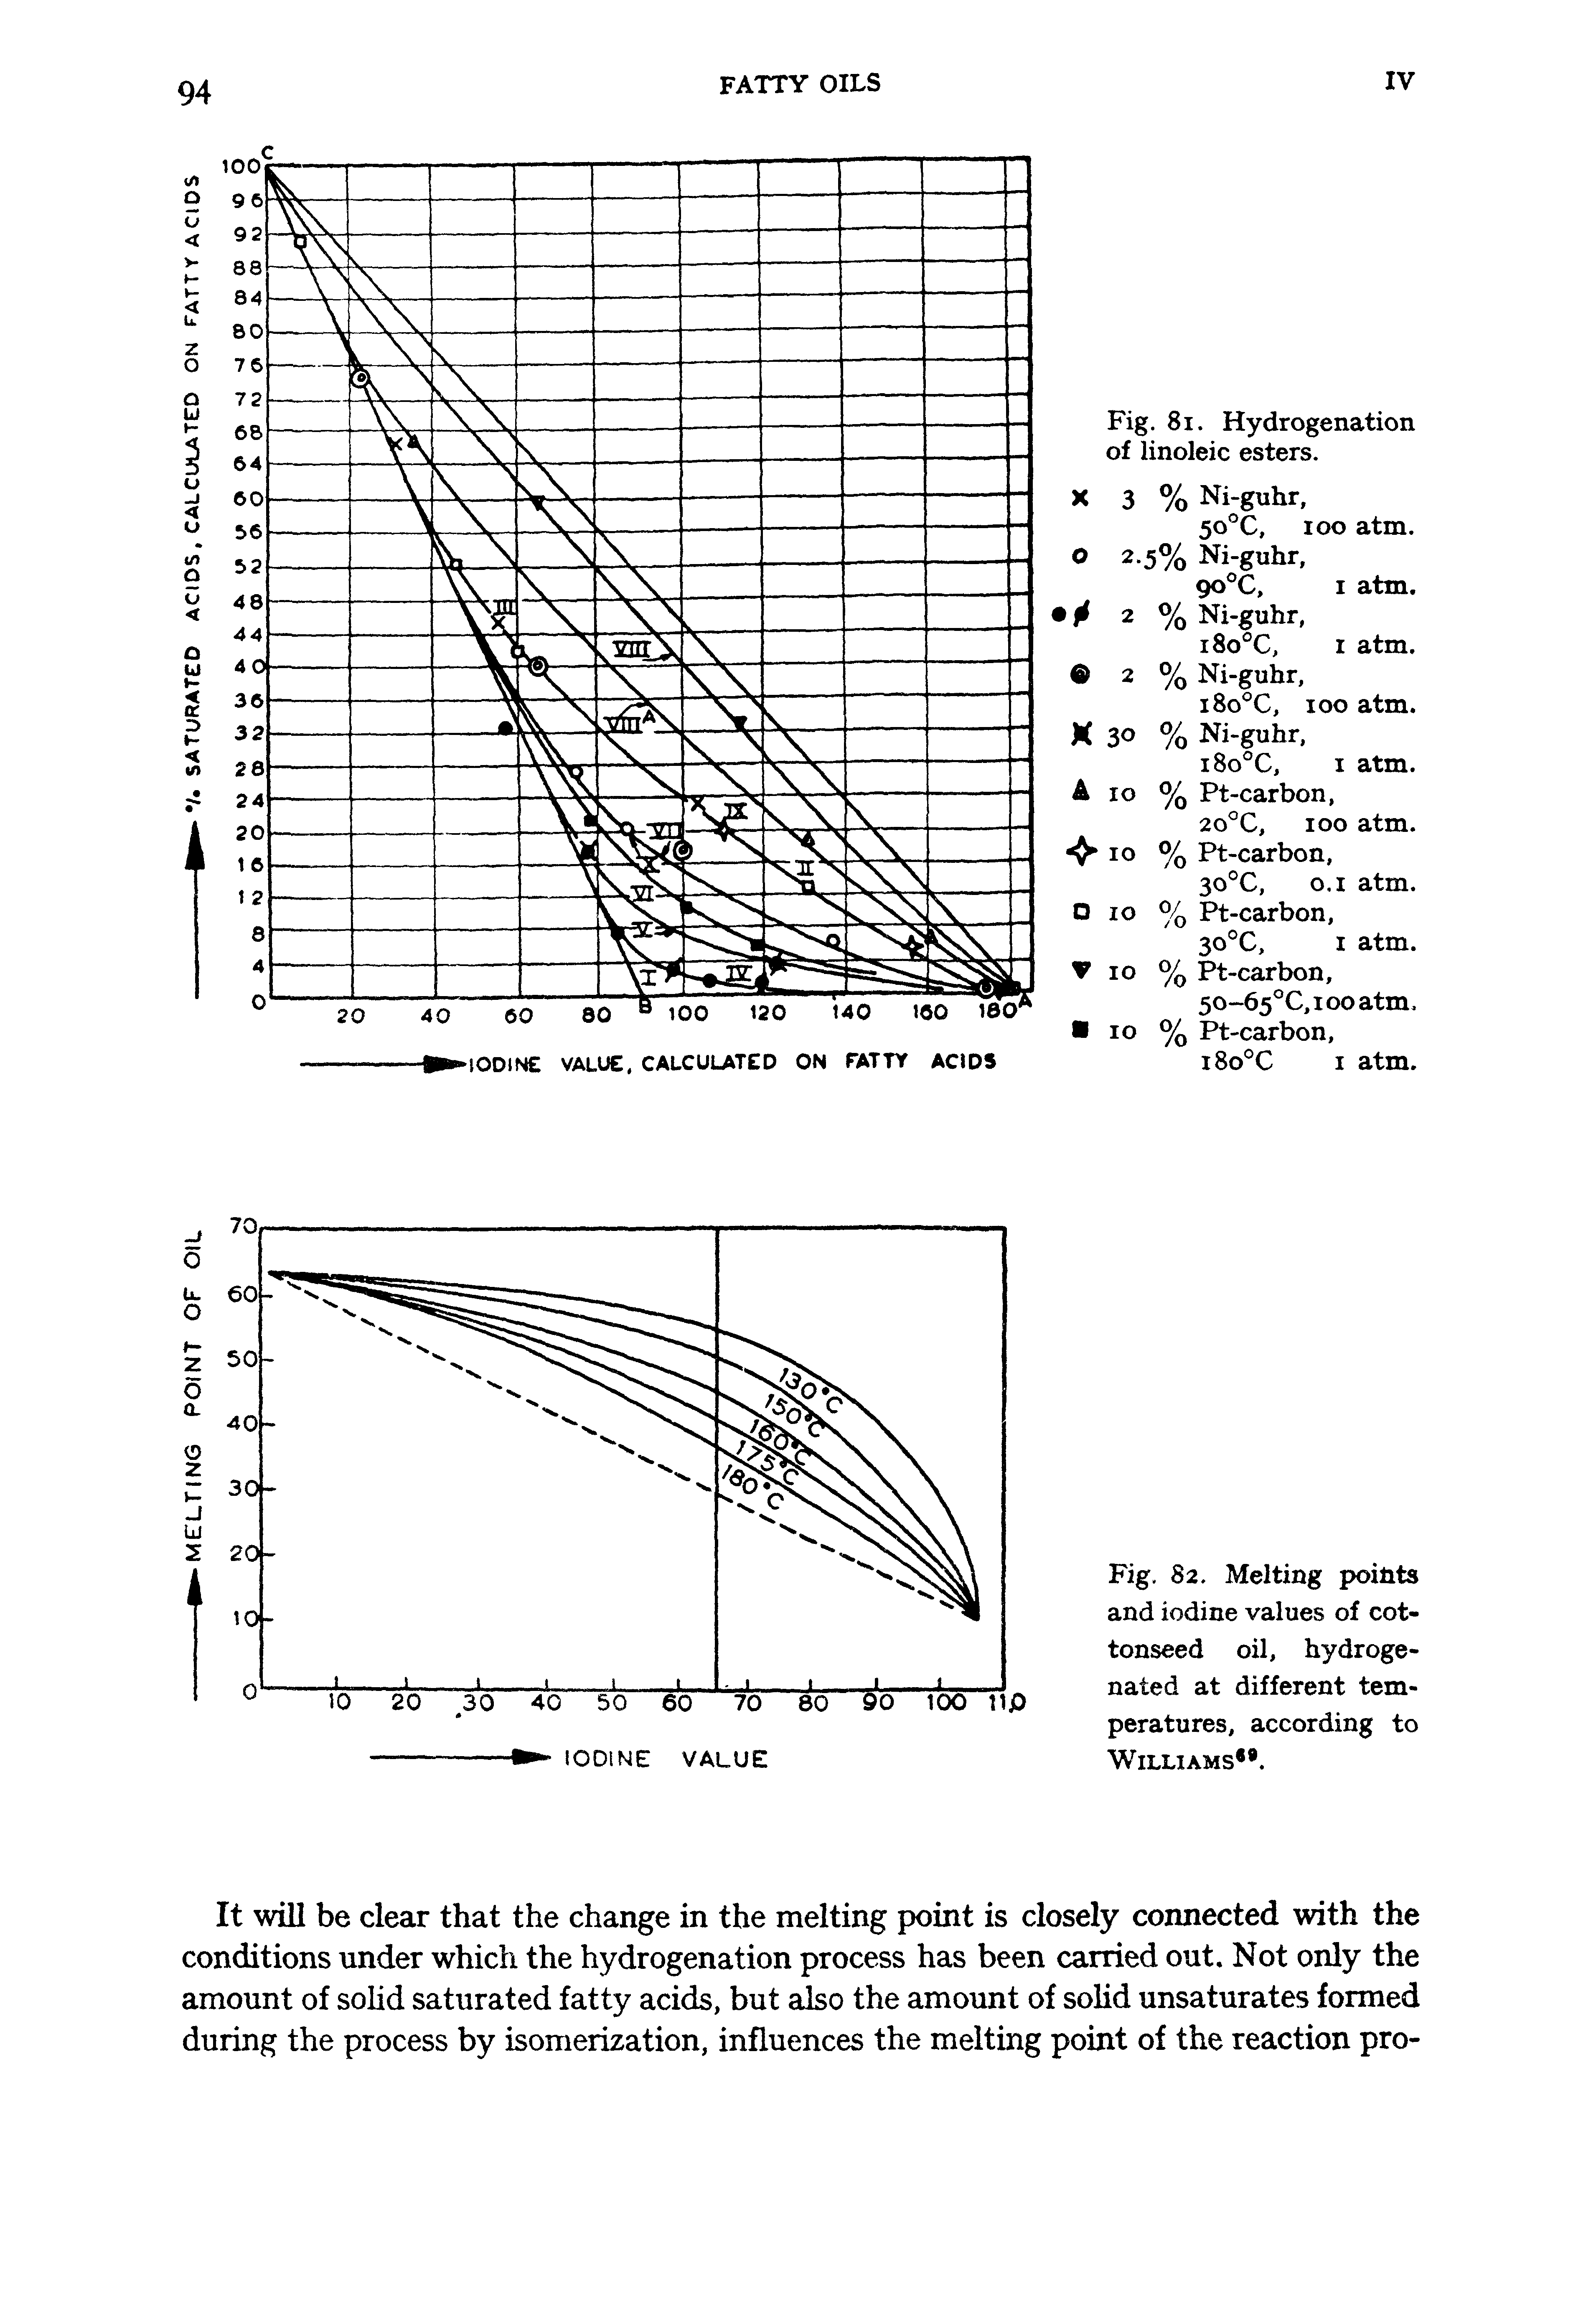 Fig. 82. Melting points and iodine values of cottonseed oil, hydrogenated at different temperatures, according to Williams. ...